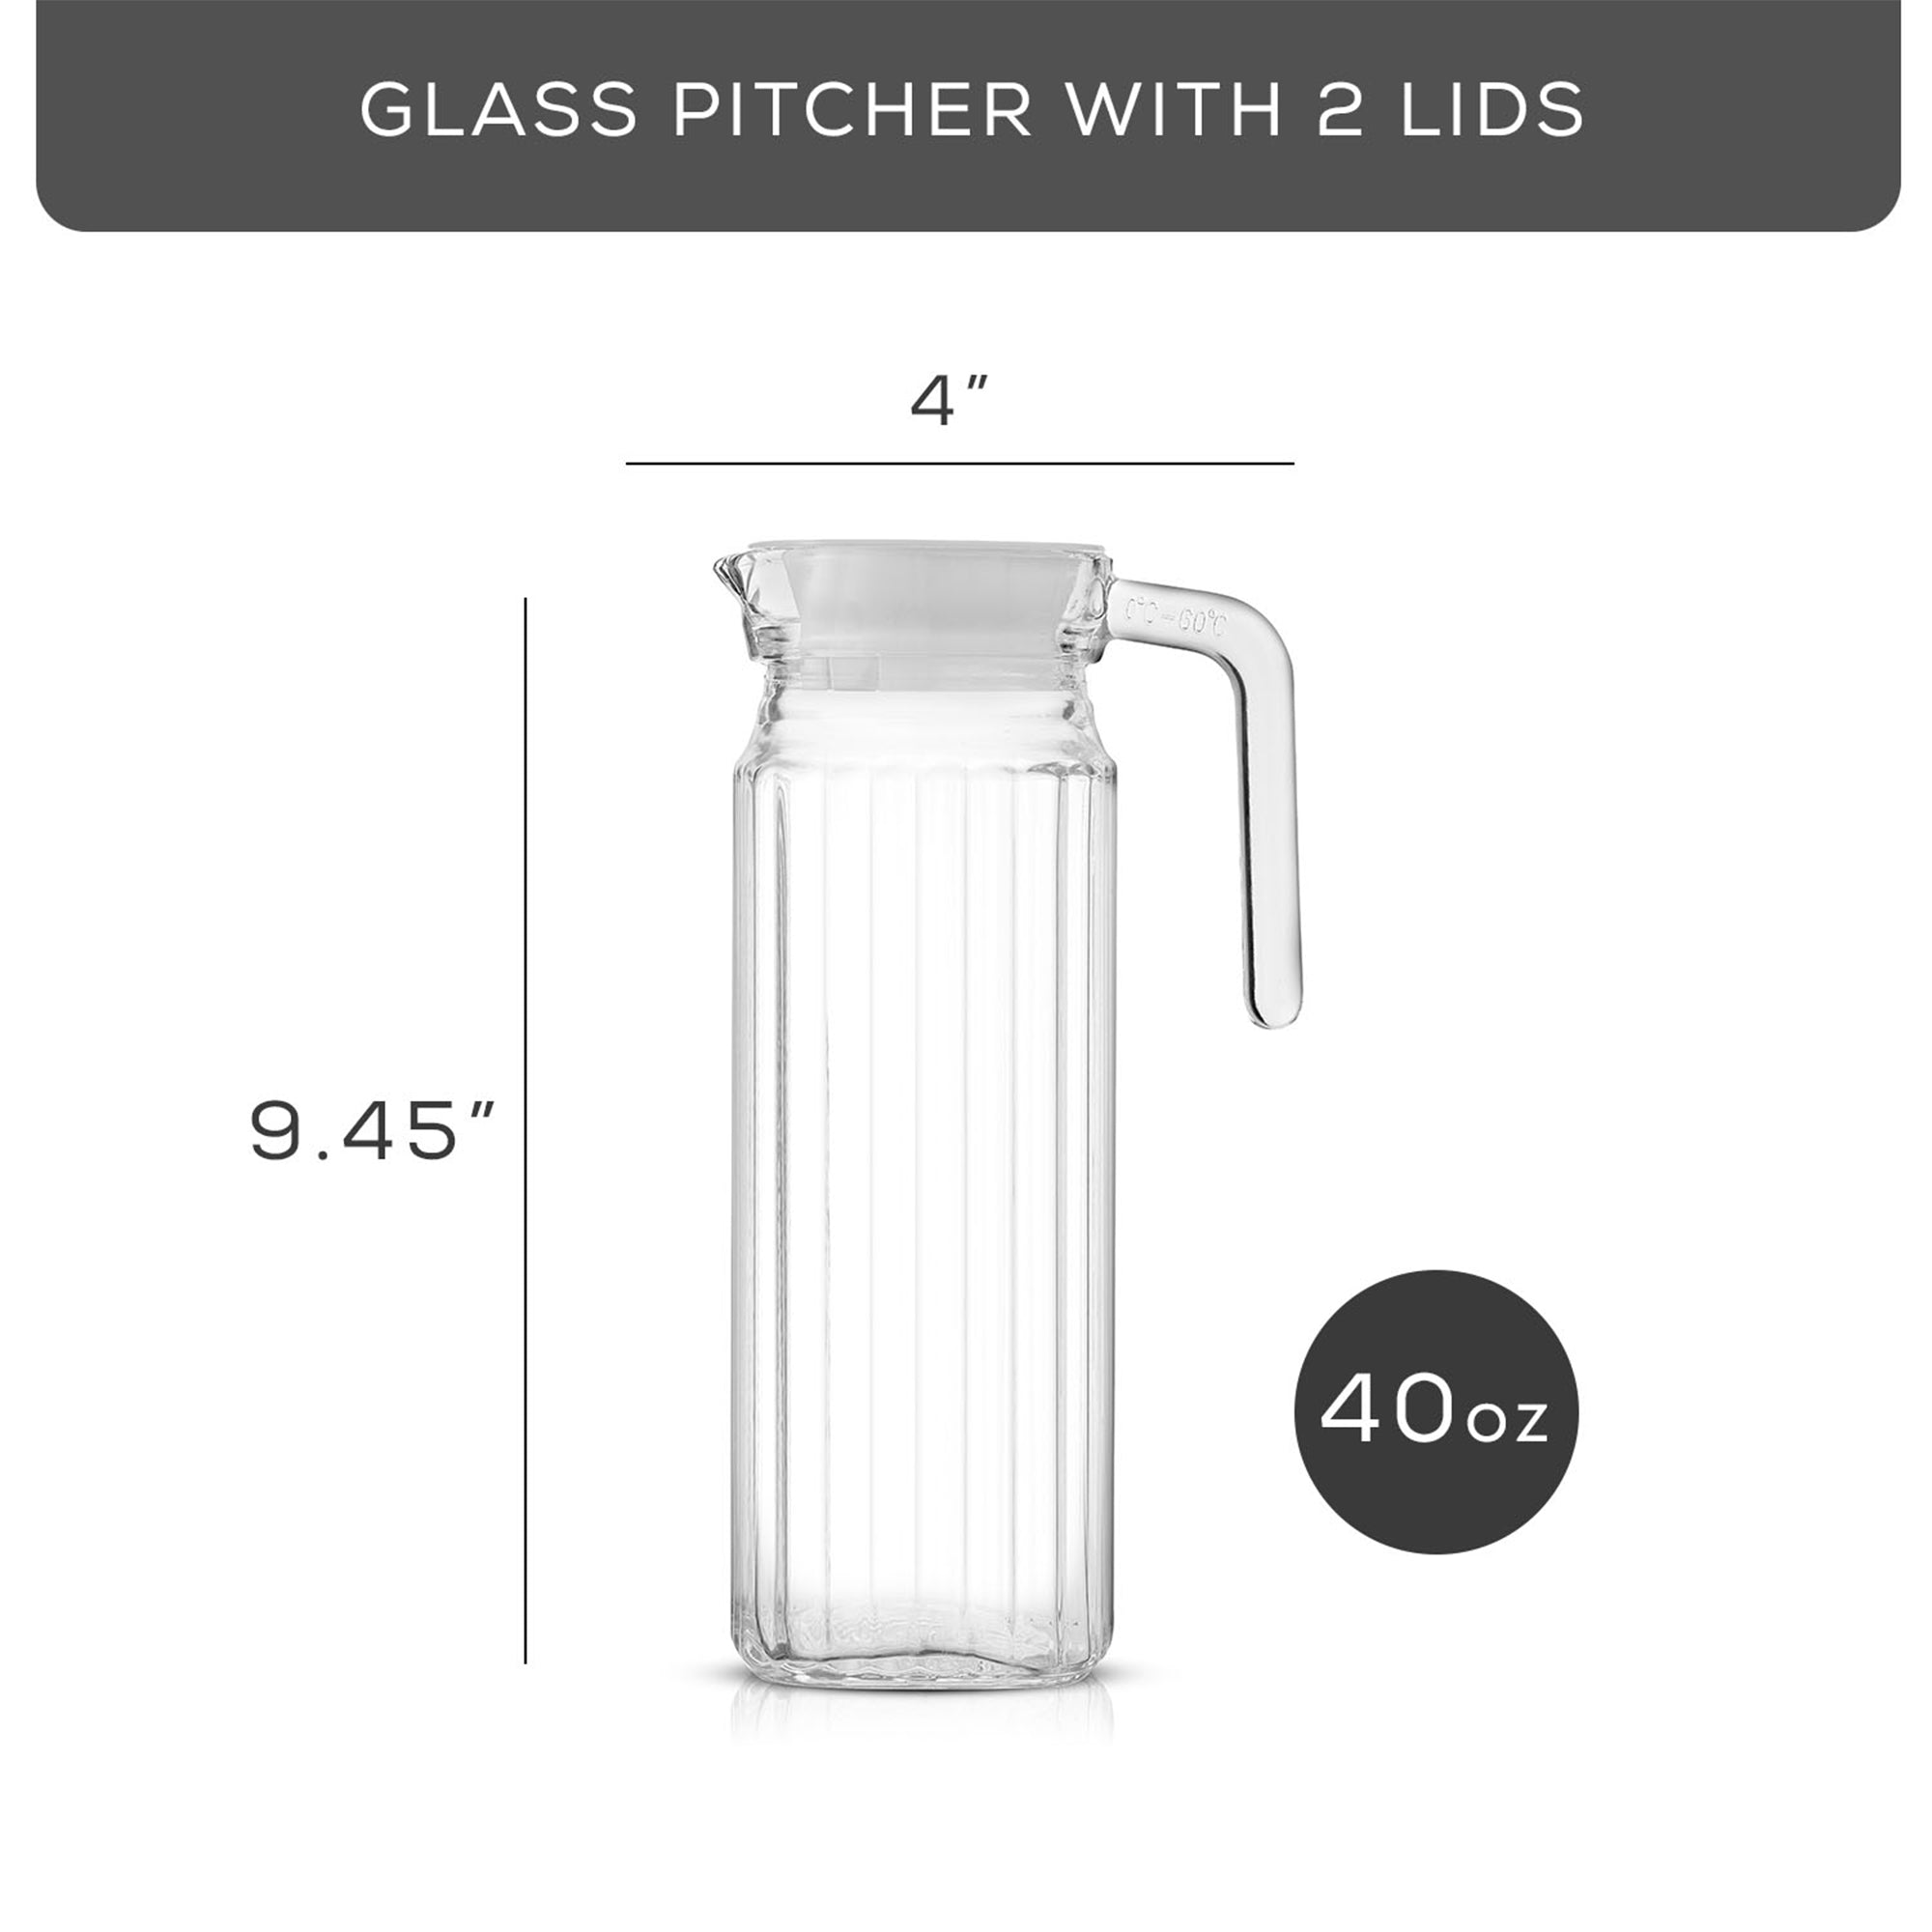 A glass pitcher with a handle and lid on a white background. The image shows the JoyJolt Beverage Serveware Glass Pitcher in detail. The pitcher has a capacity of 40 ounces and it has measurements marked on the side. It has a clear glass body, a white lid, and a handle for easy pouring. Text on the image reads “GLASS PITCHER WITH 2 LIDS 4”W x 9.45”H 40oz.”